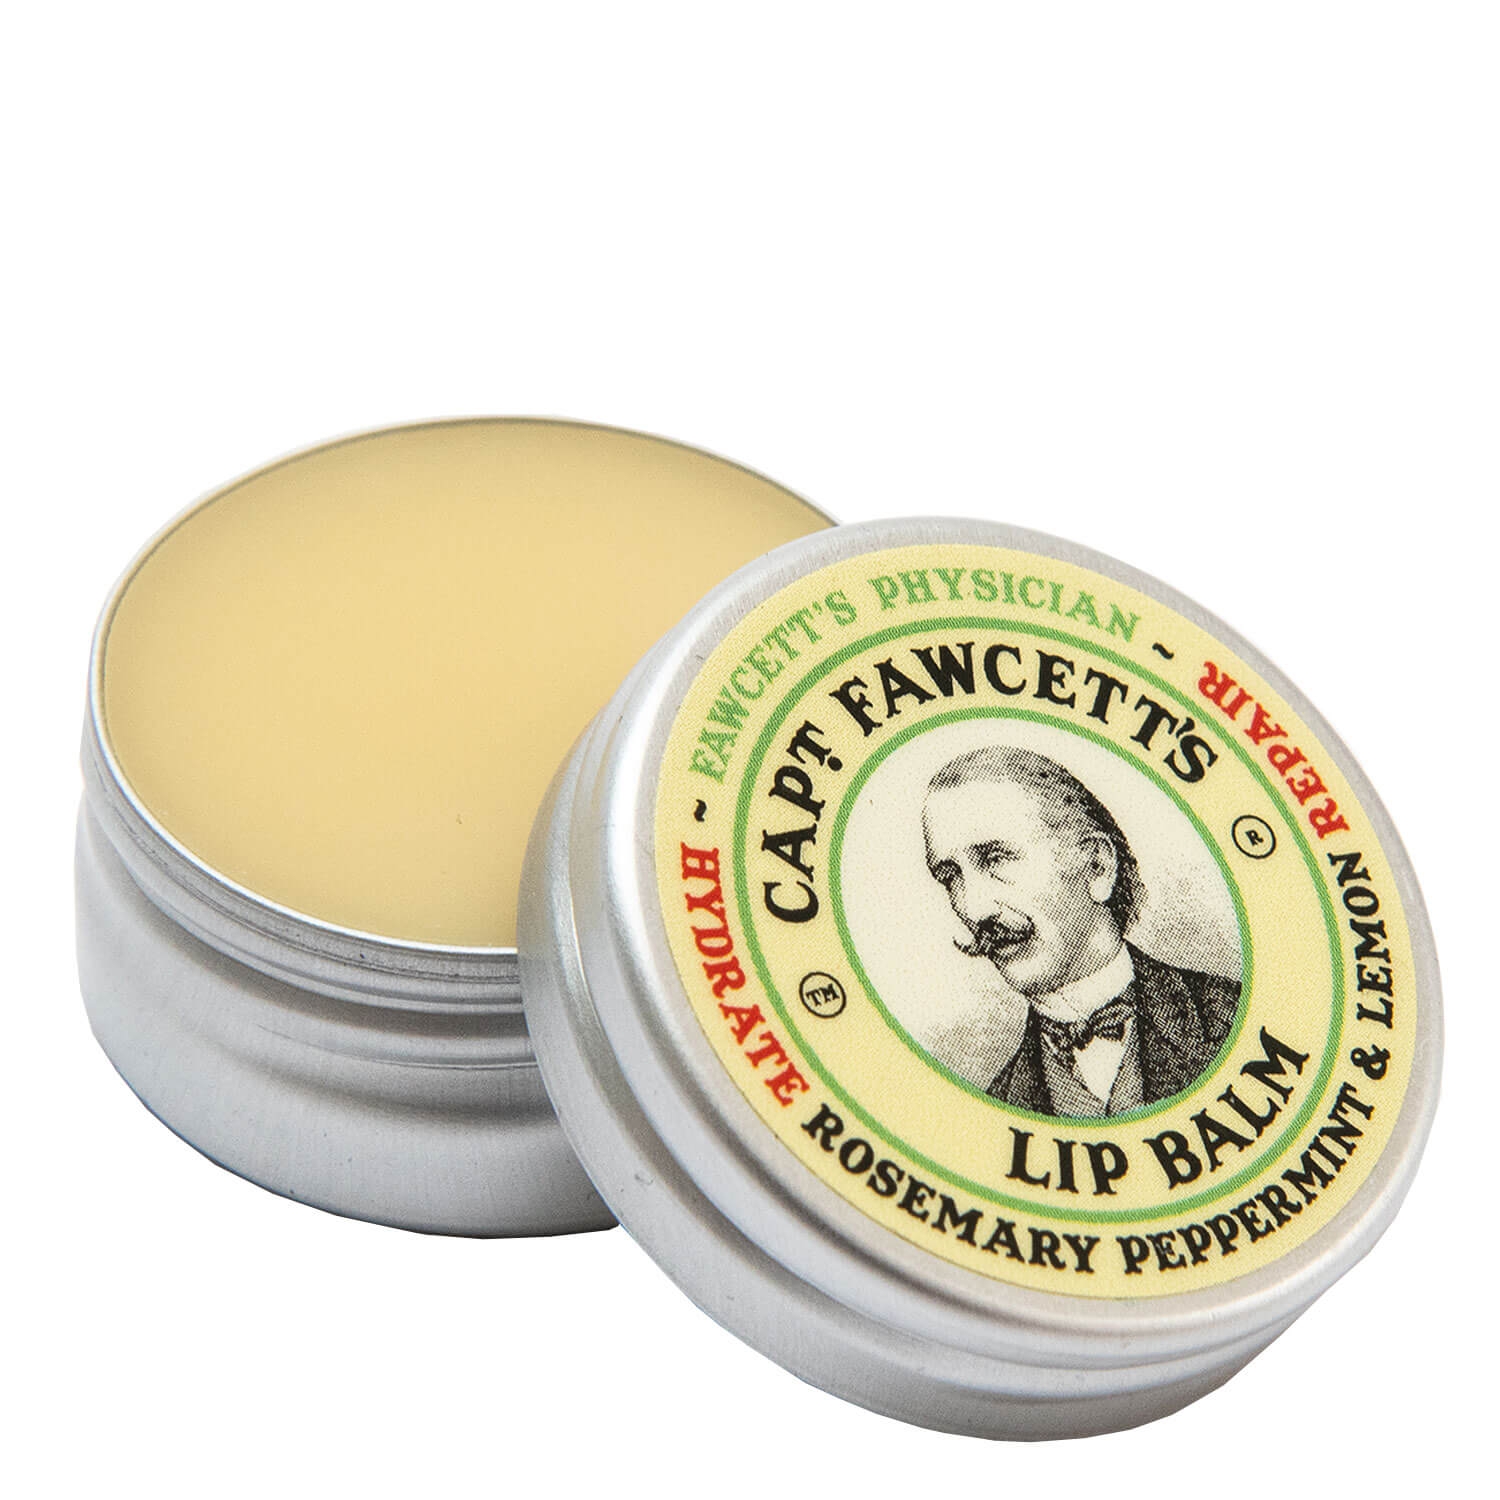 Product image from Capt. Fawcett Care - Fawcett's Physician Lip Balm